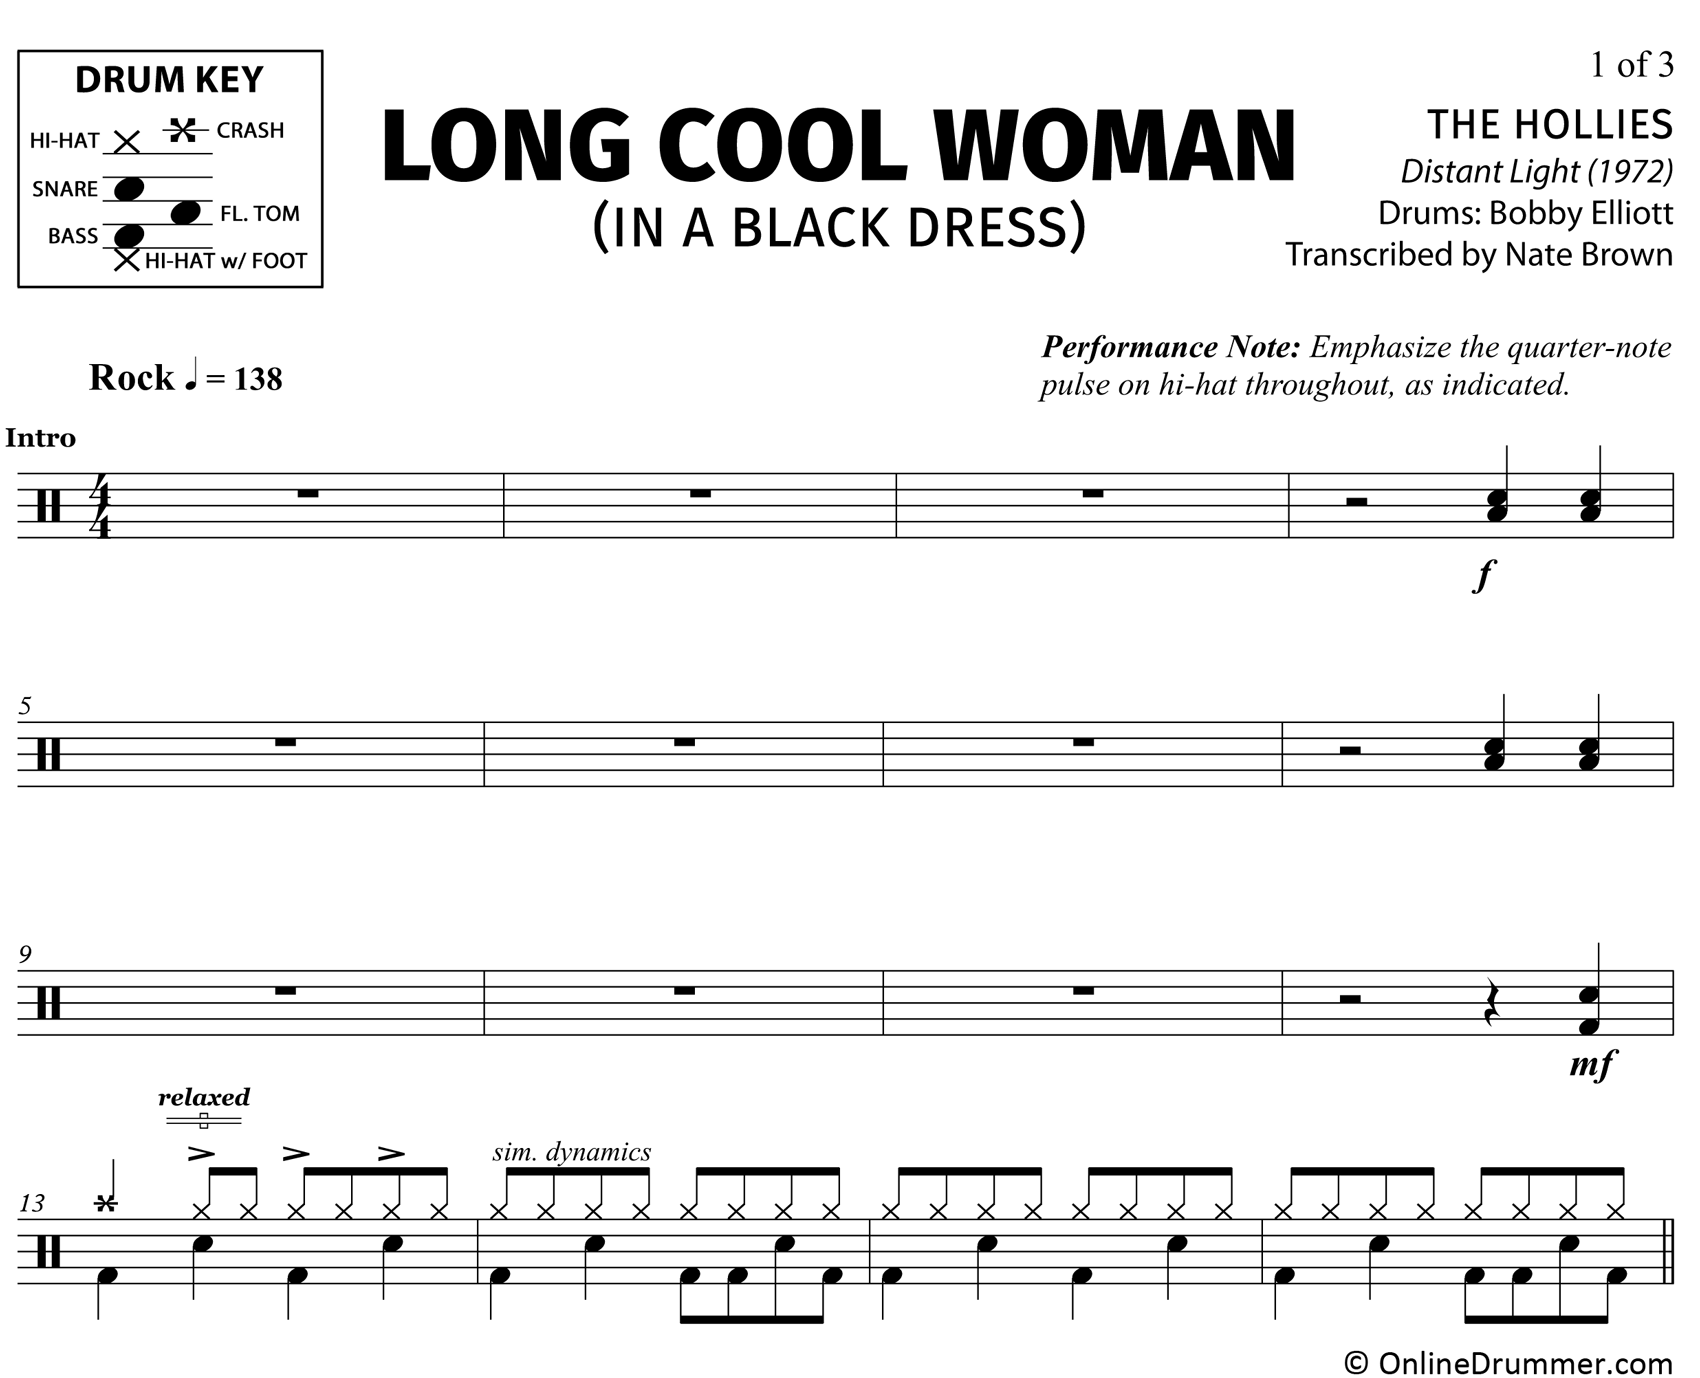 Long Cool Woman in a Black Dress - The Hollies - Drum Sheet Music